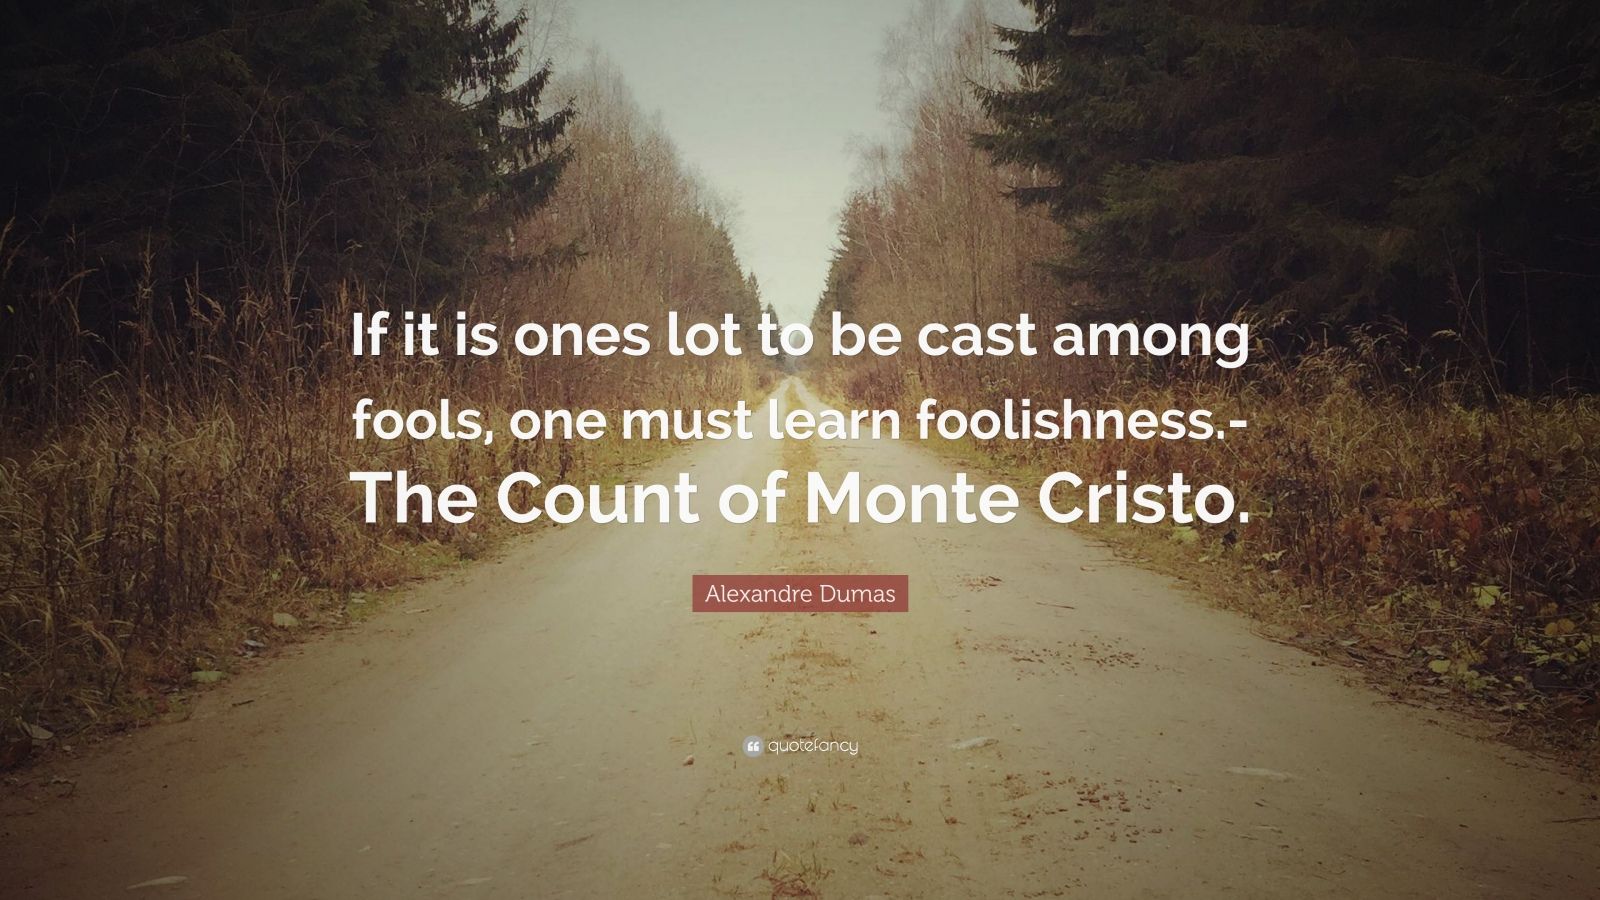 quote from the count of monte cristo